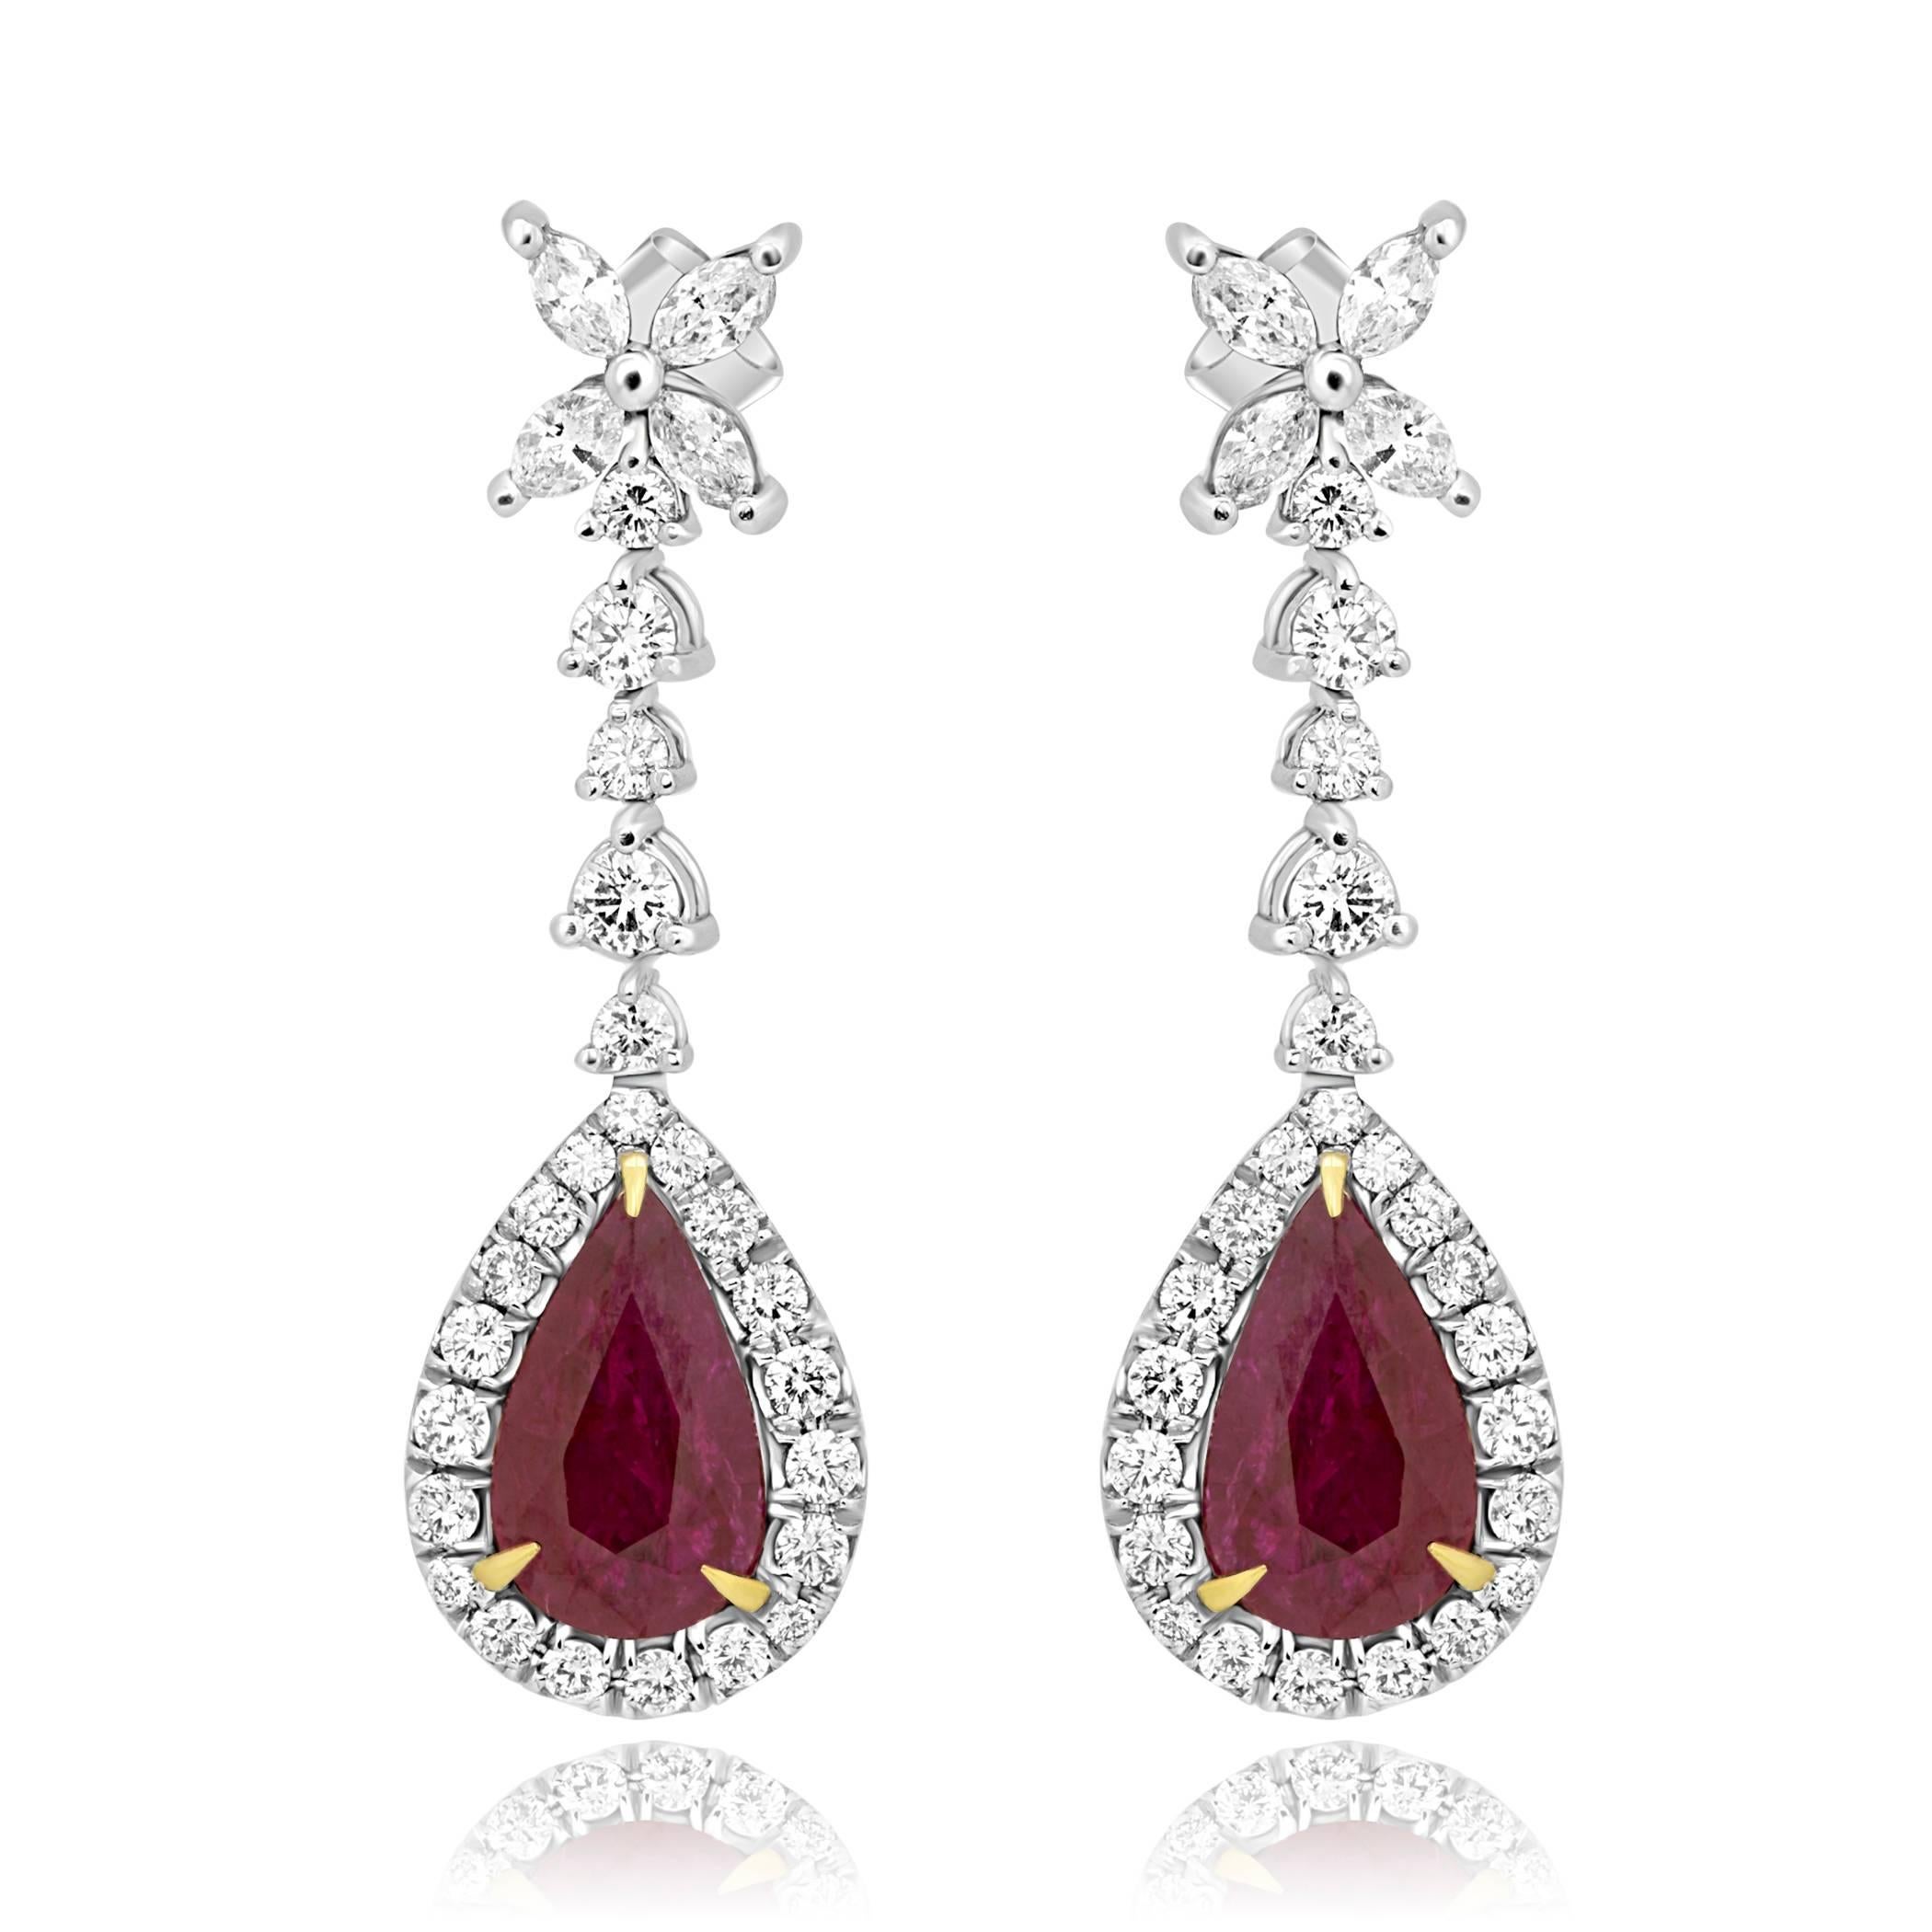 Stunning 2 Pear Shape Ruby 5.29 Carat encircled in a single Halo of white round diamonds 1.26 Carat with 8 White Marquise Diamond on top 0.68 Carat in 18K White Gold Earring.

Style available in different price ranges. Prices are based on your